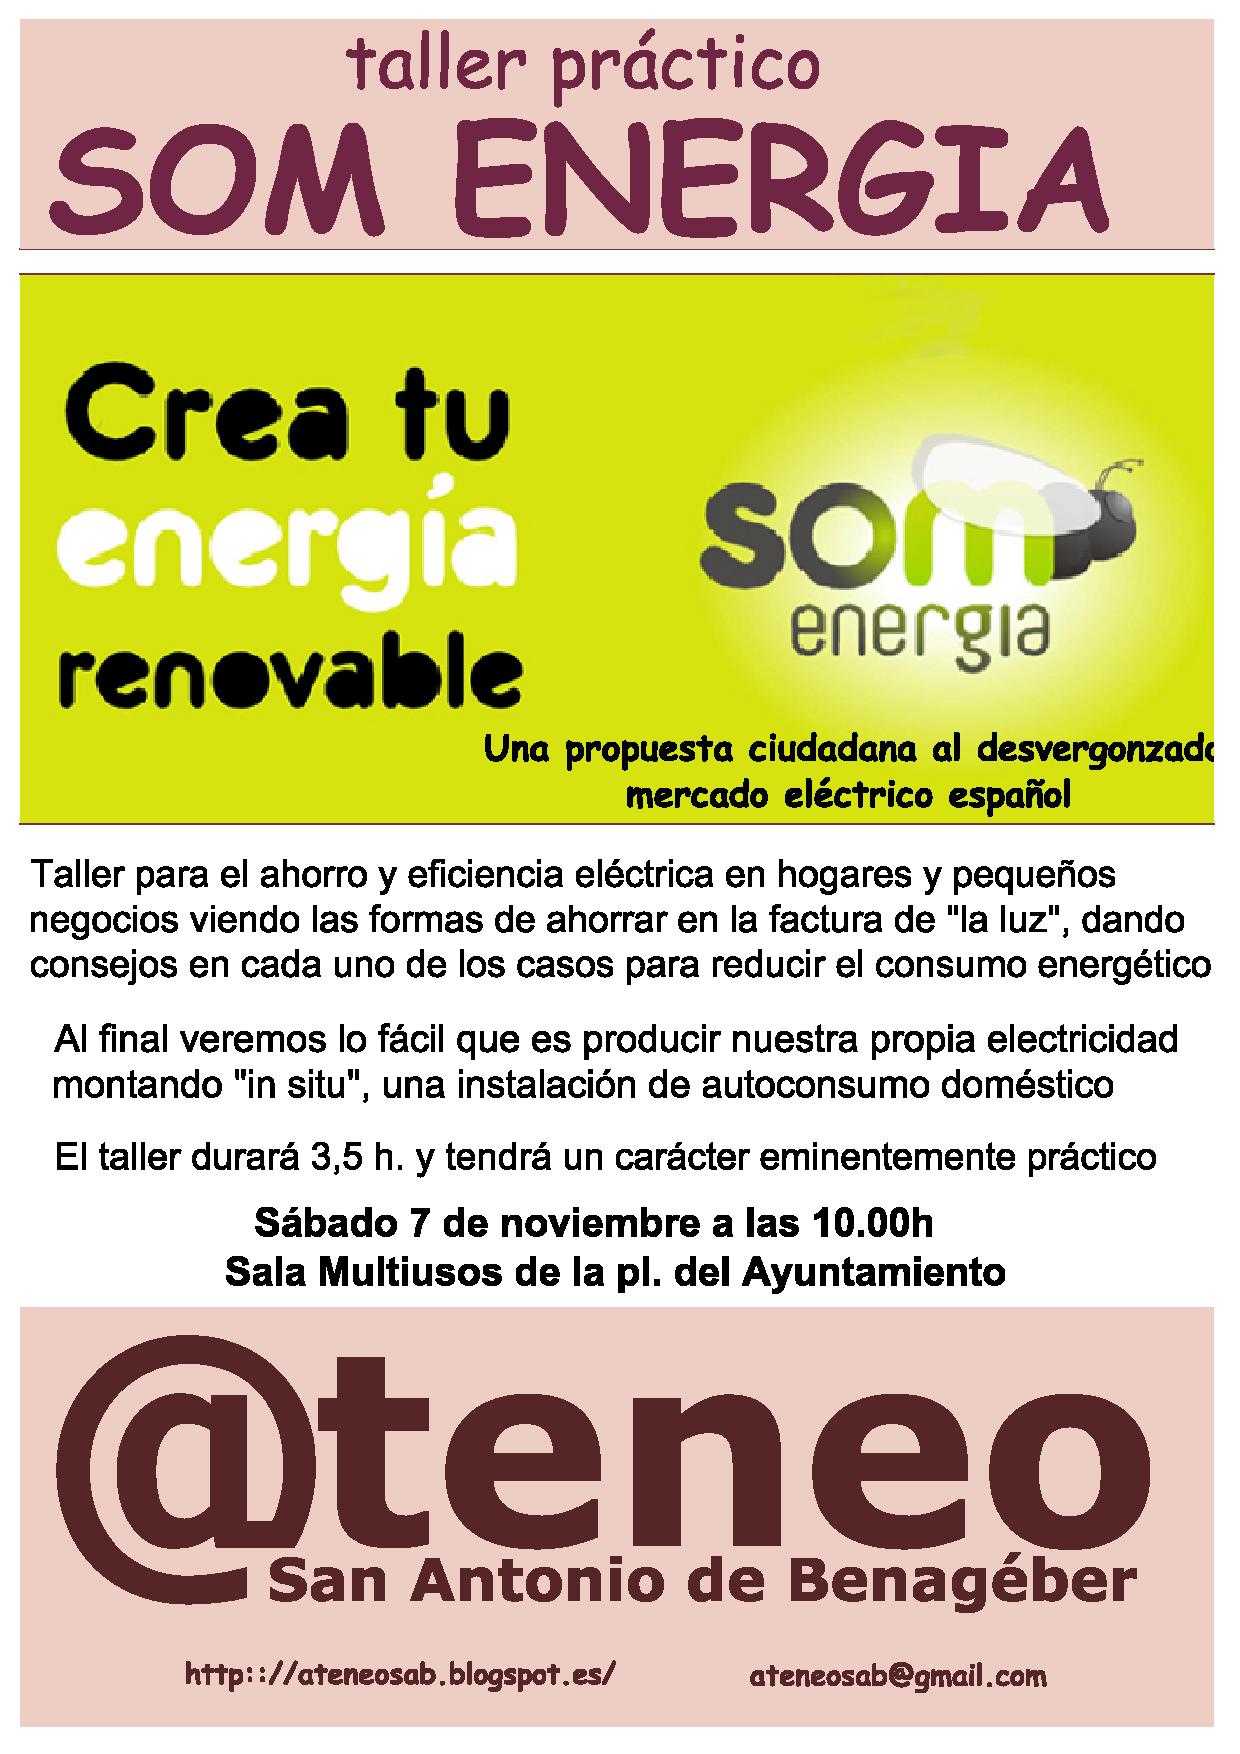 taller som energia A4